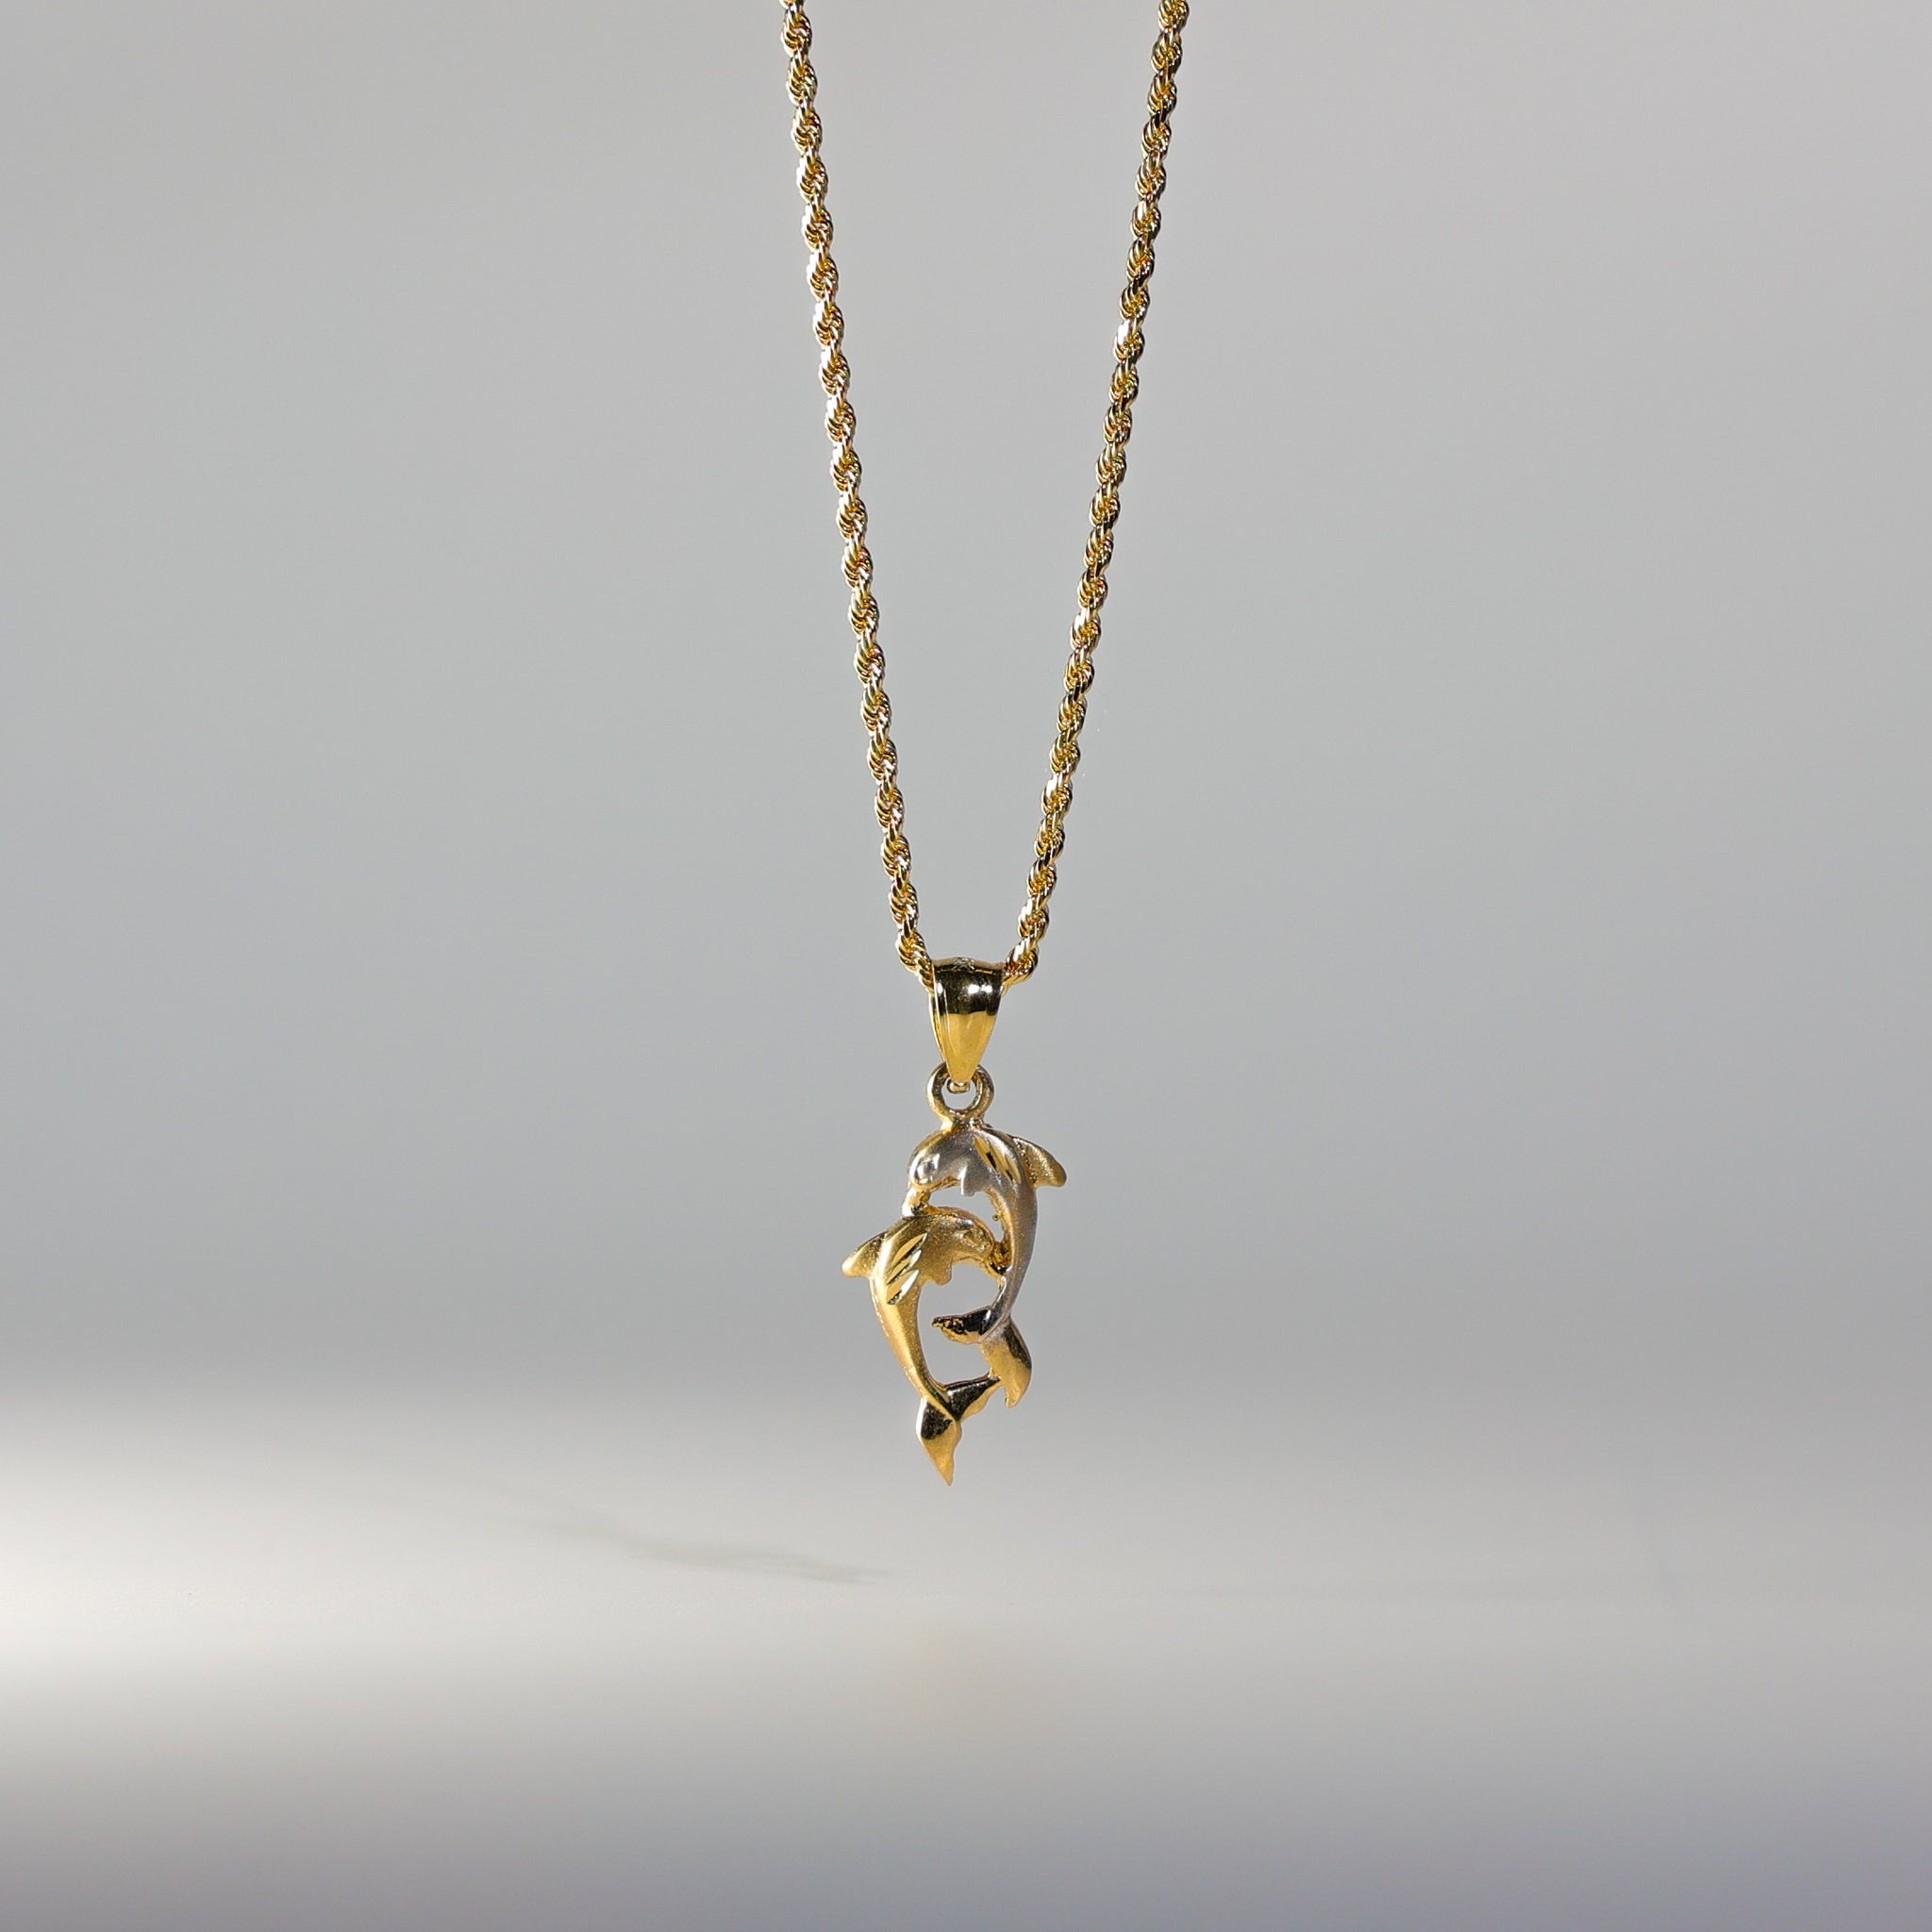 Gold Dolphin Pendant Model-1664 - Charlie & Co. Jewelry